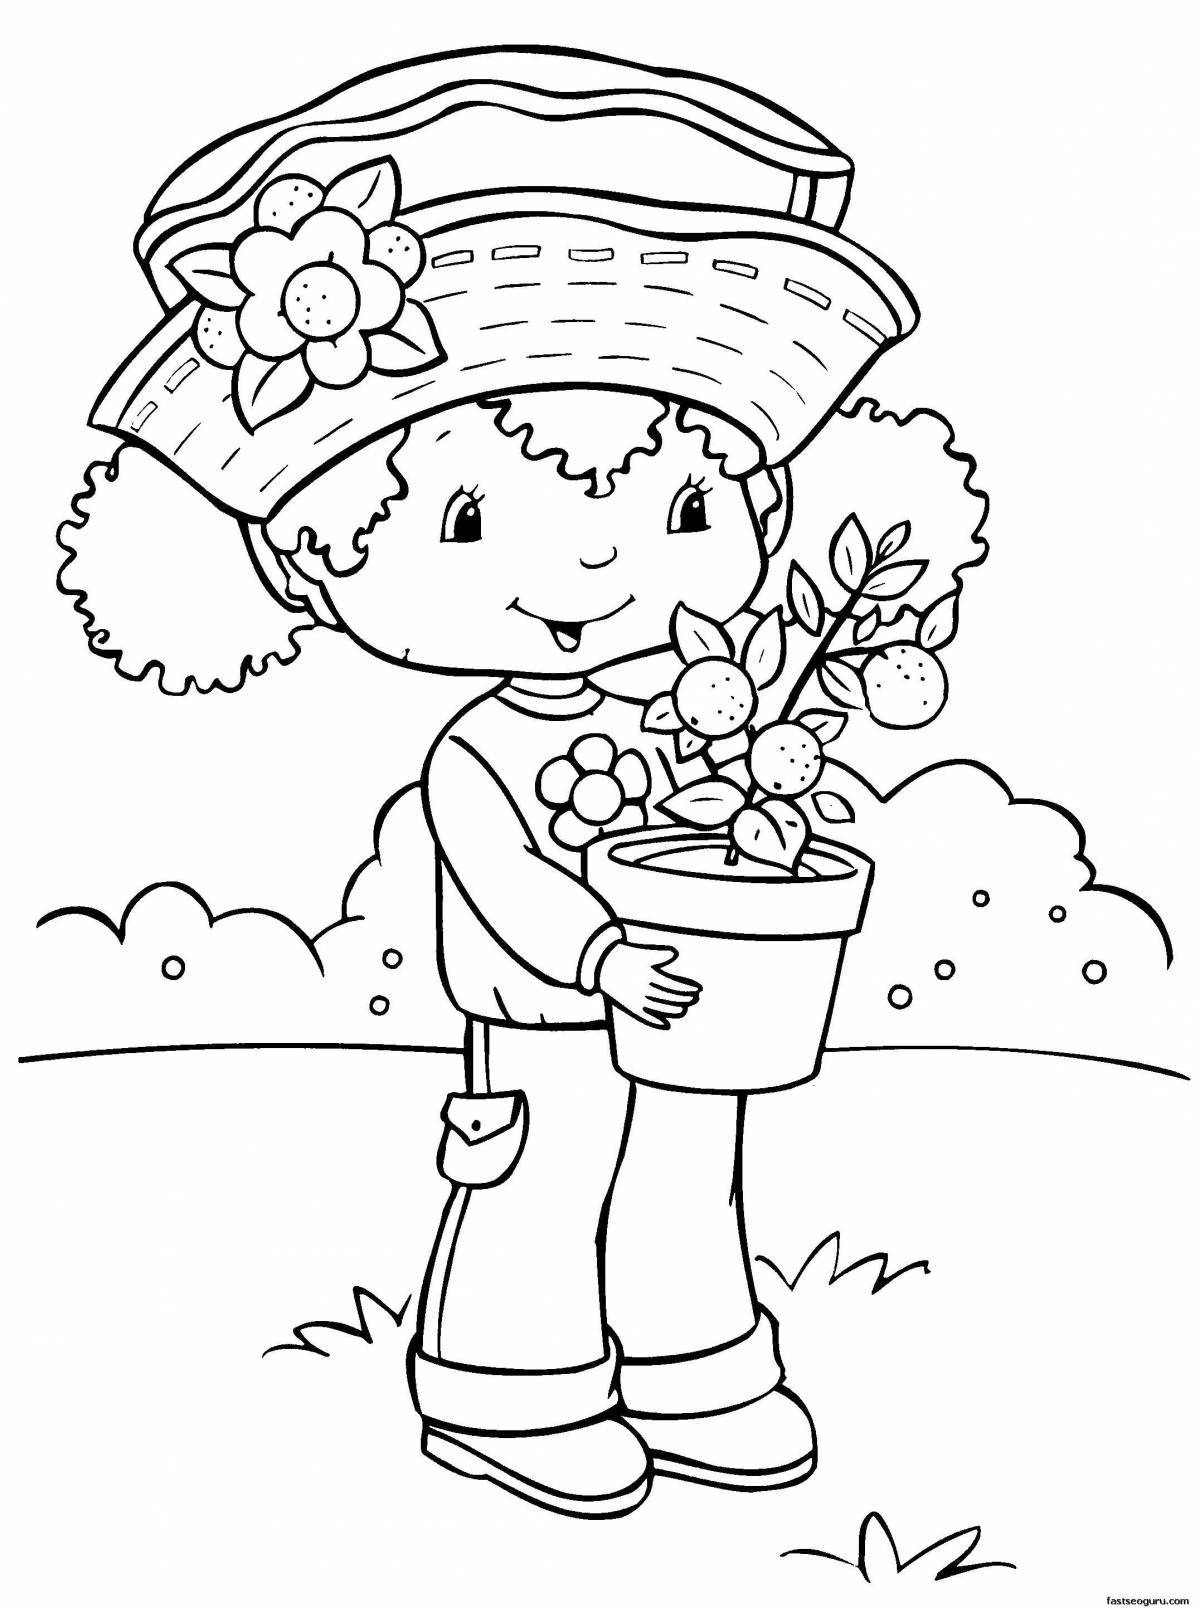 Coloring book for girls and boys